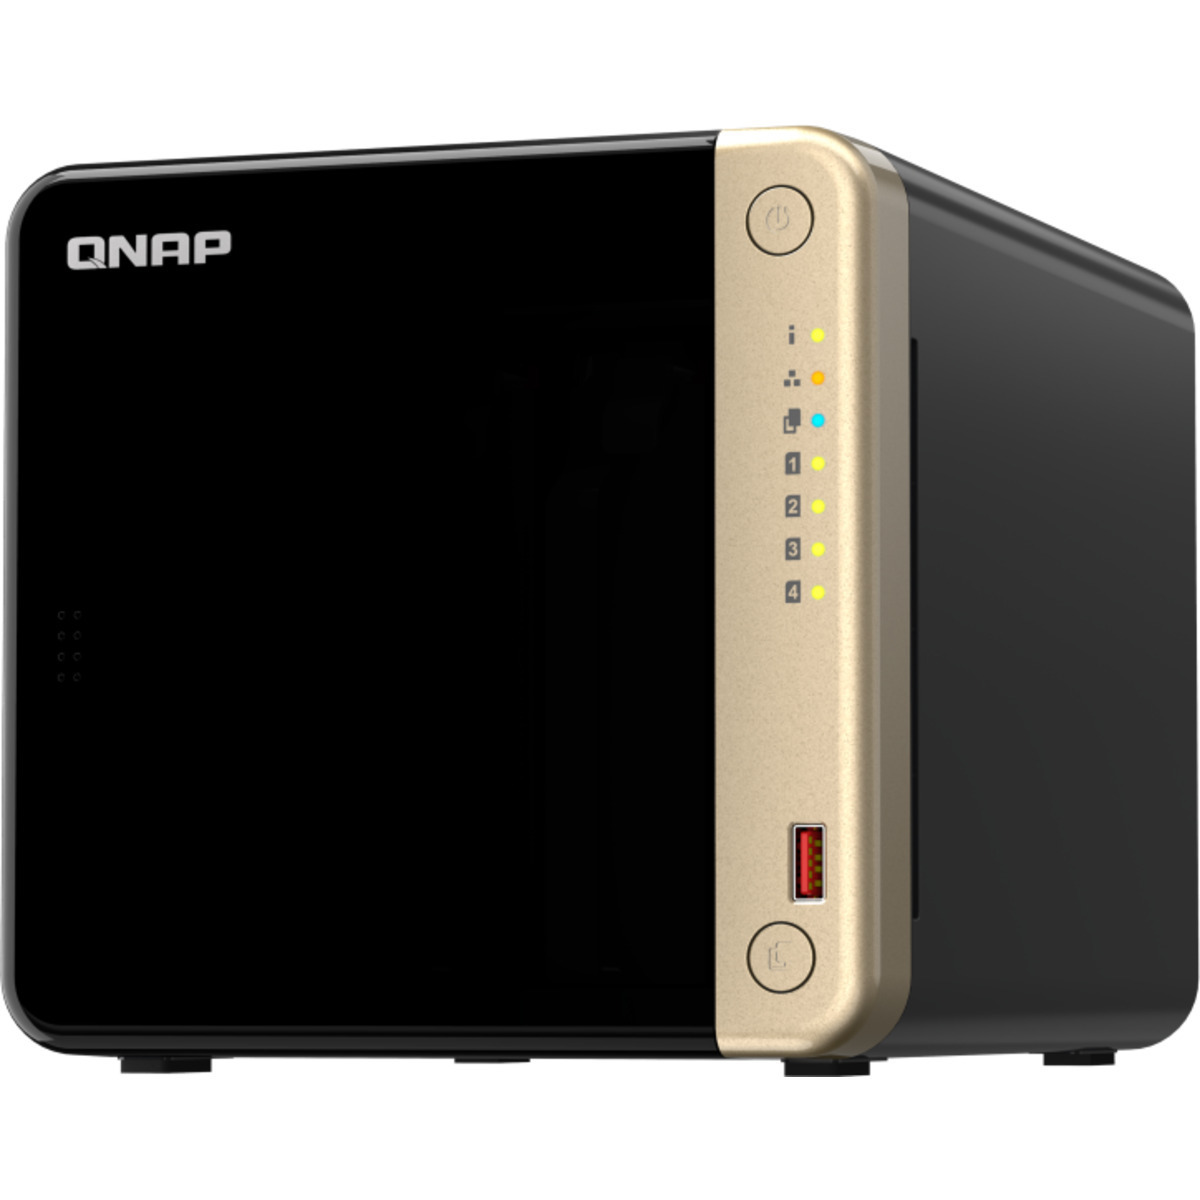 QNAP TS-464 24tb 4-Bay Desktop Multimedia / Power User / Business NAS - Network Attached Storage Device 4x6tb Seagate IronWolf ST6000VN006 3.5 5400rpm SATA 6Gb/s HDD NAS Class Drives Installed - Burn-In Tested TS-464